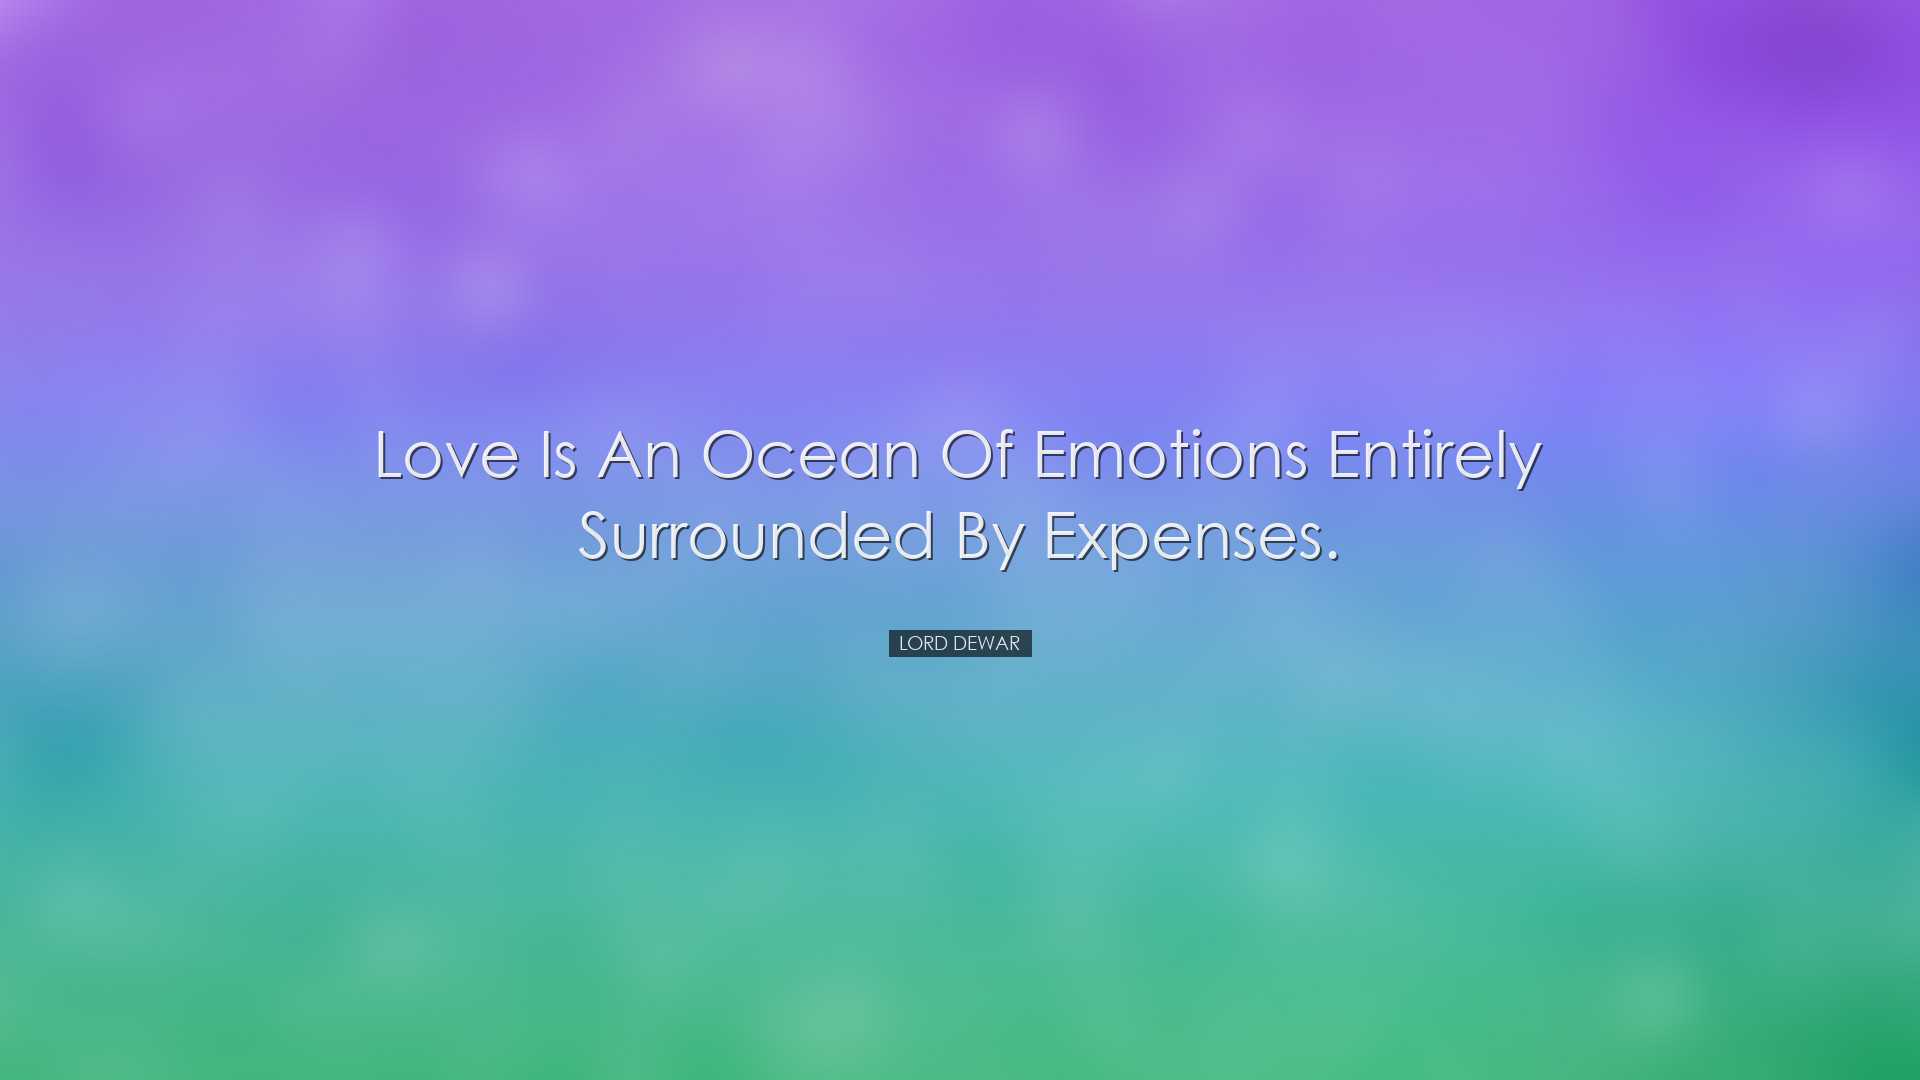 Love is an ocean of emotions entirely surrounded by expenses. - Lo